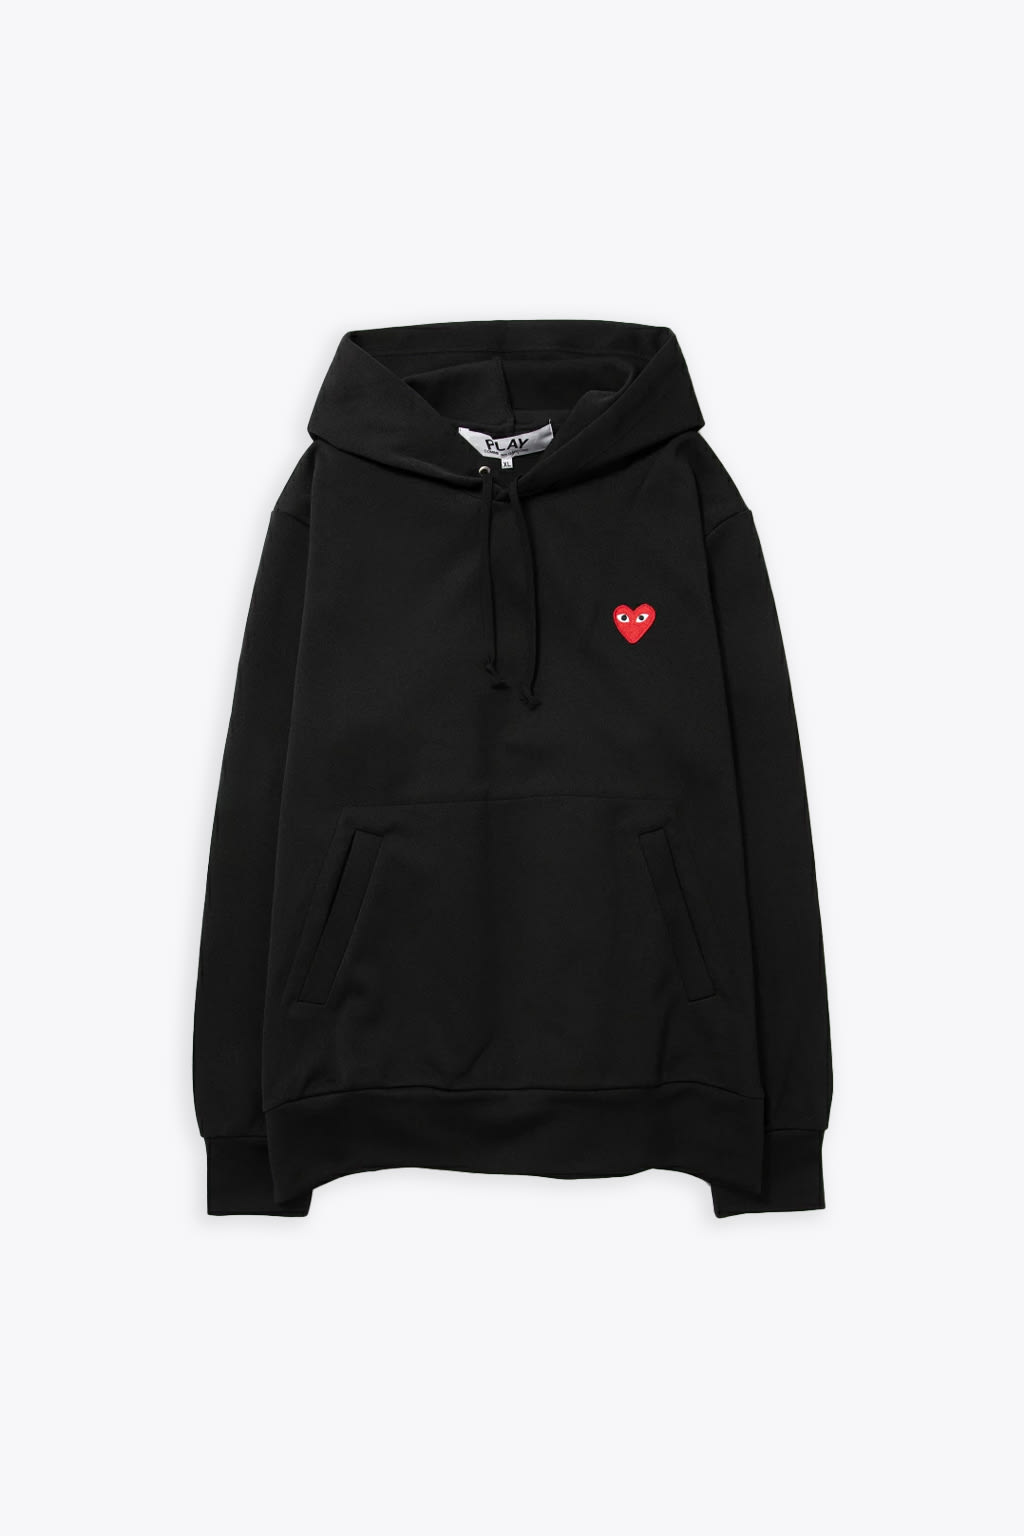 Comme des Garçons Play Mens Sweatshirt Knit Black hoodie with heart patch at chest